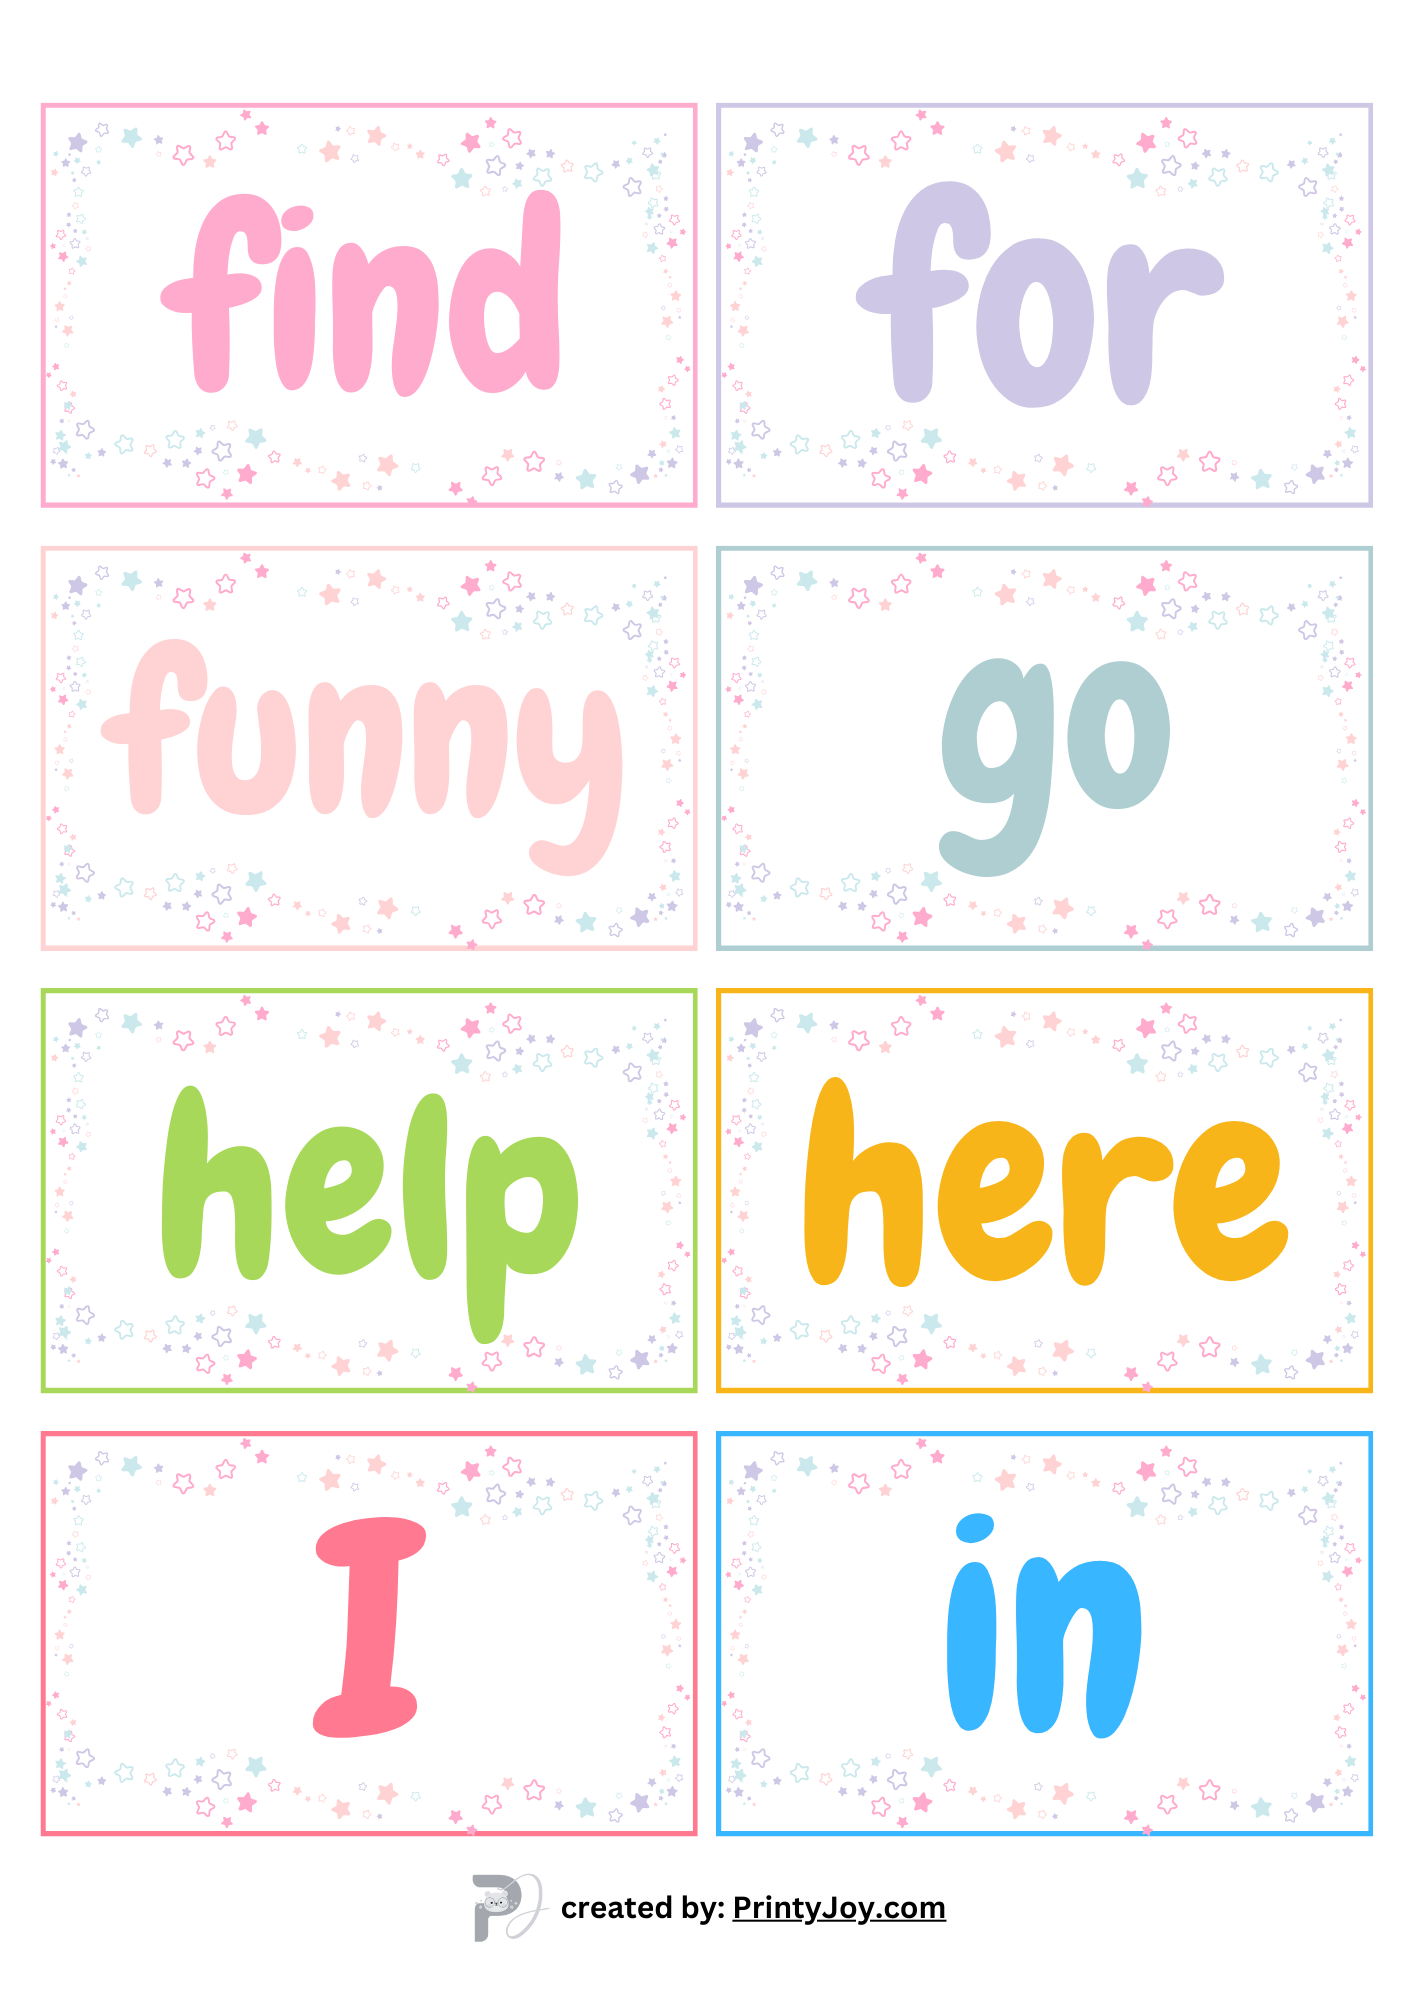 Pre primer sight words flashcards free